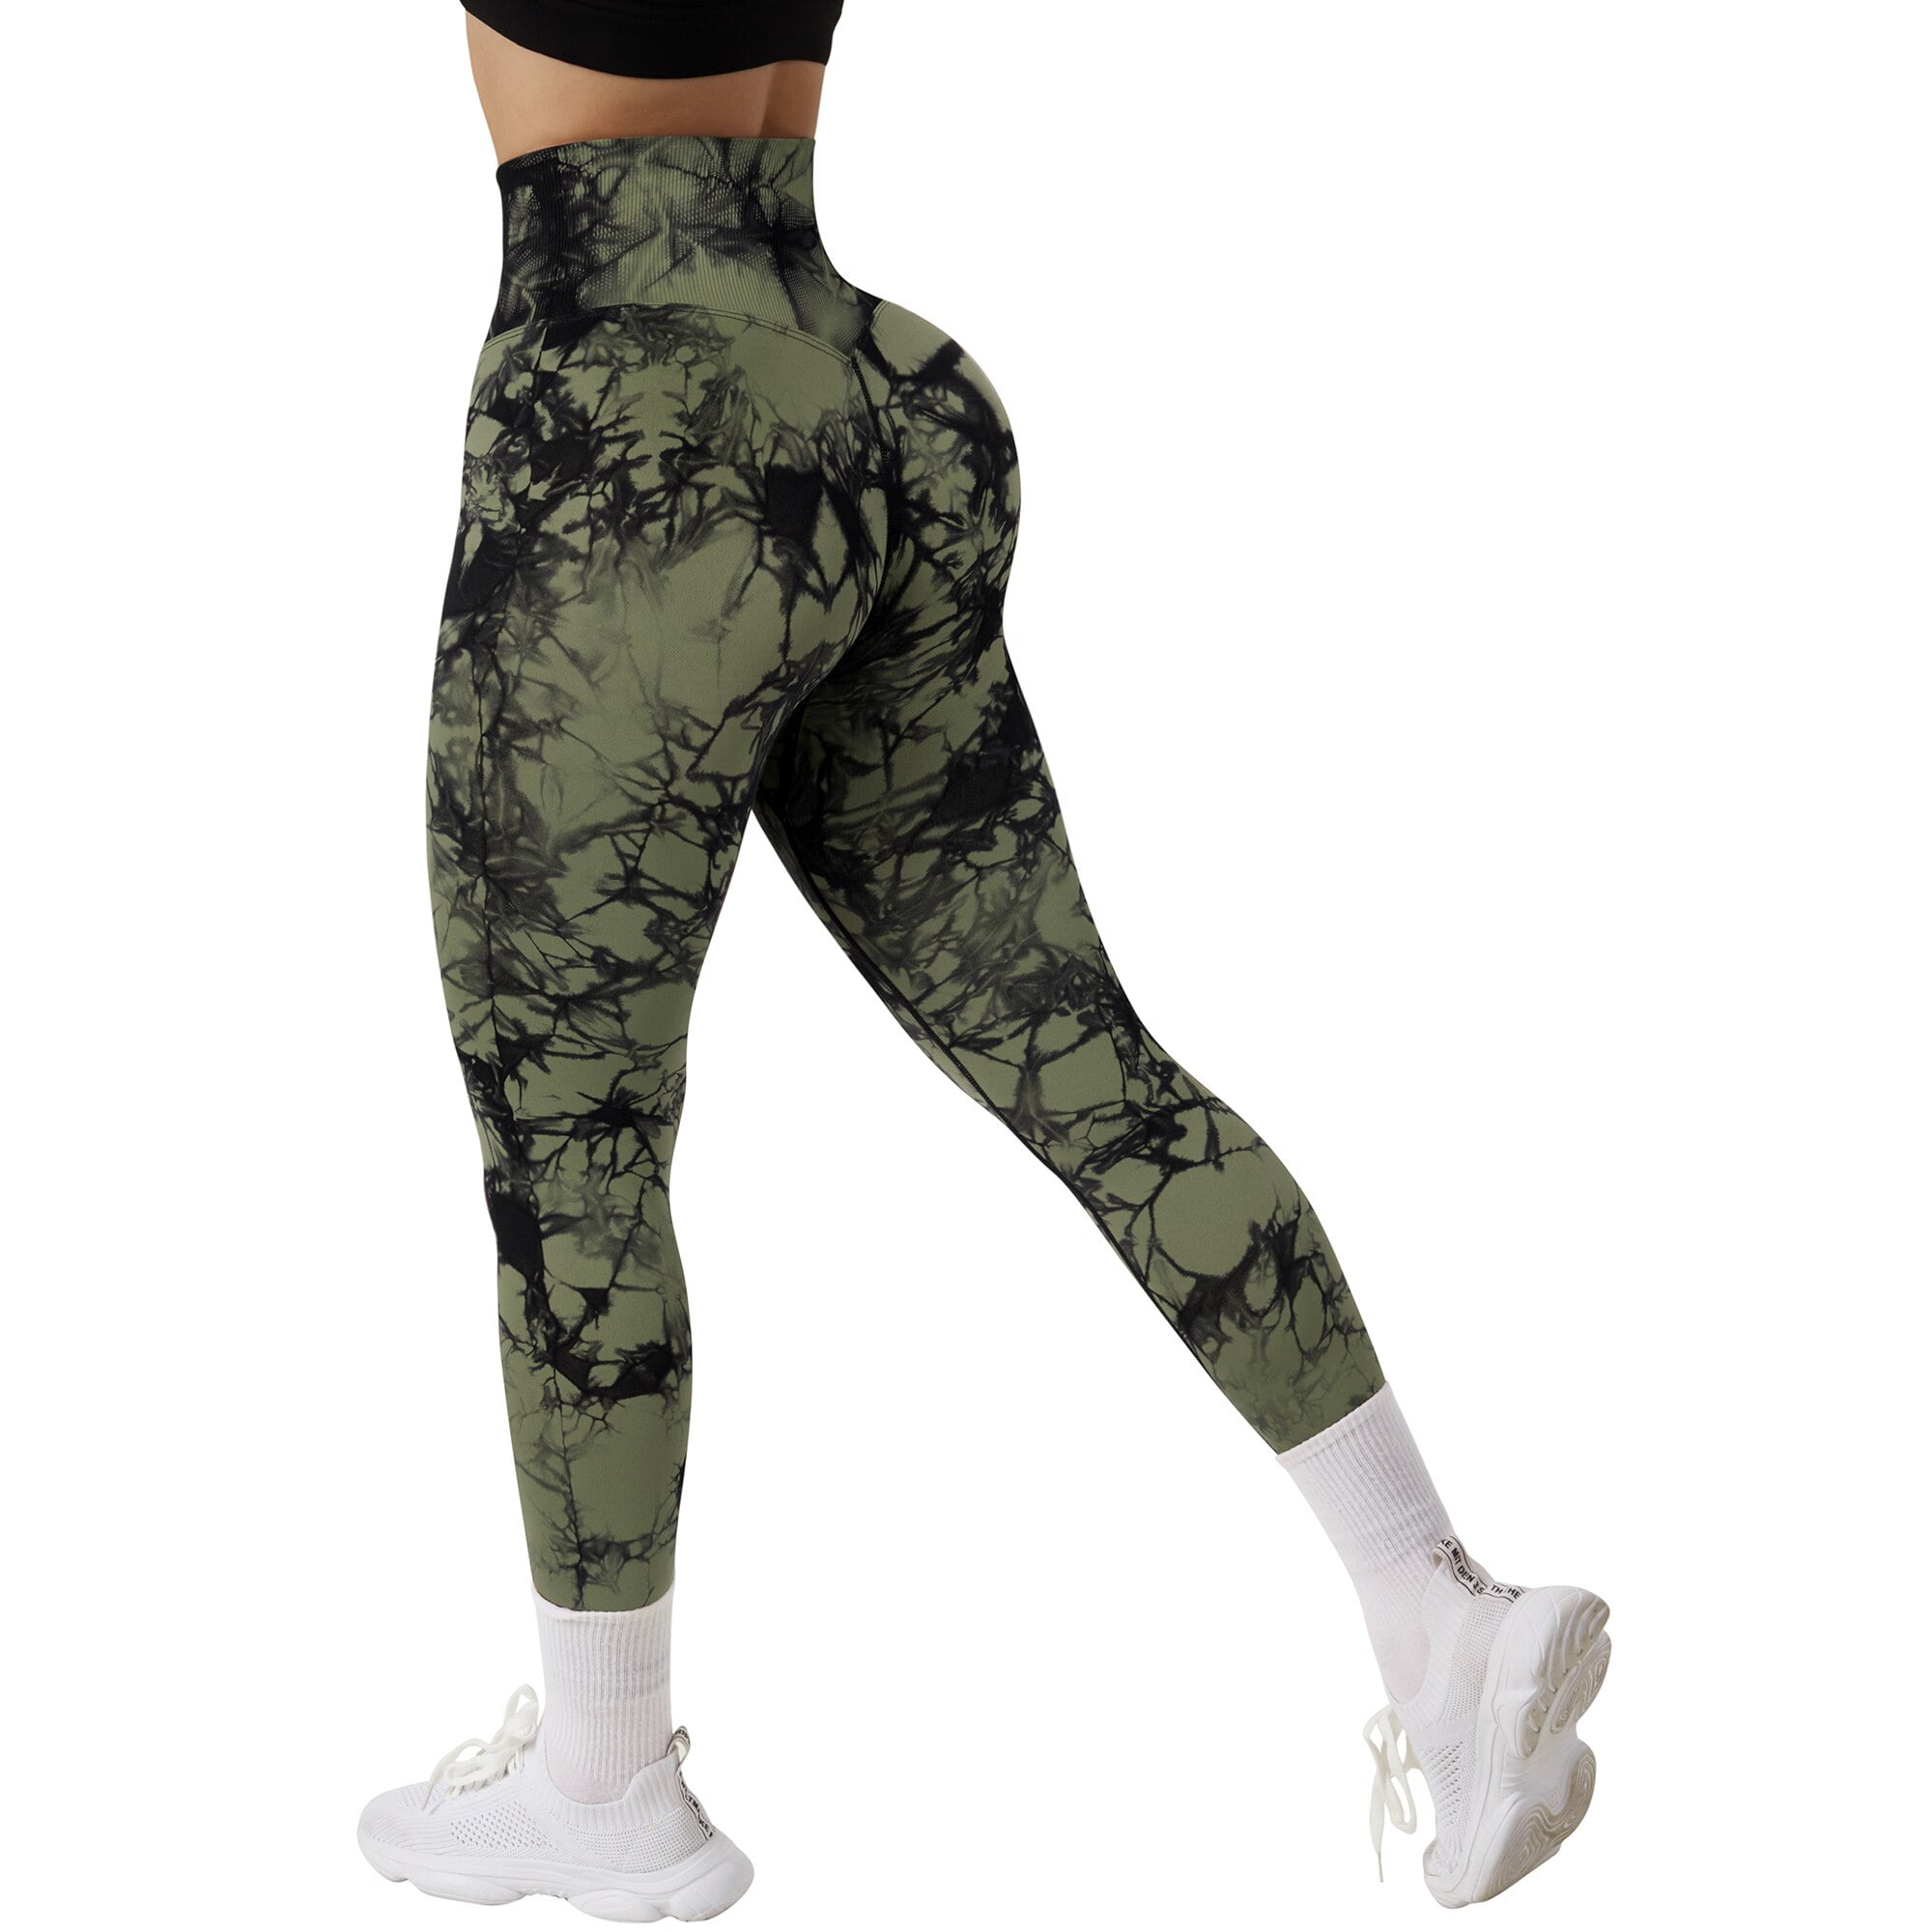 Buy SHAPERX Seamless High Waisted Yoga Pants No Front Seam Buttery